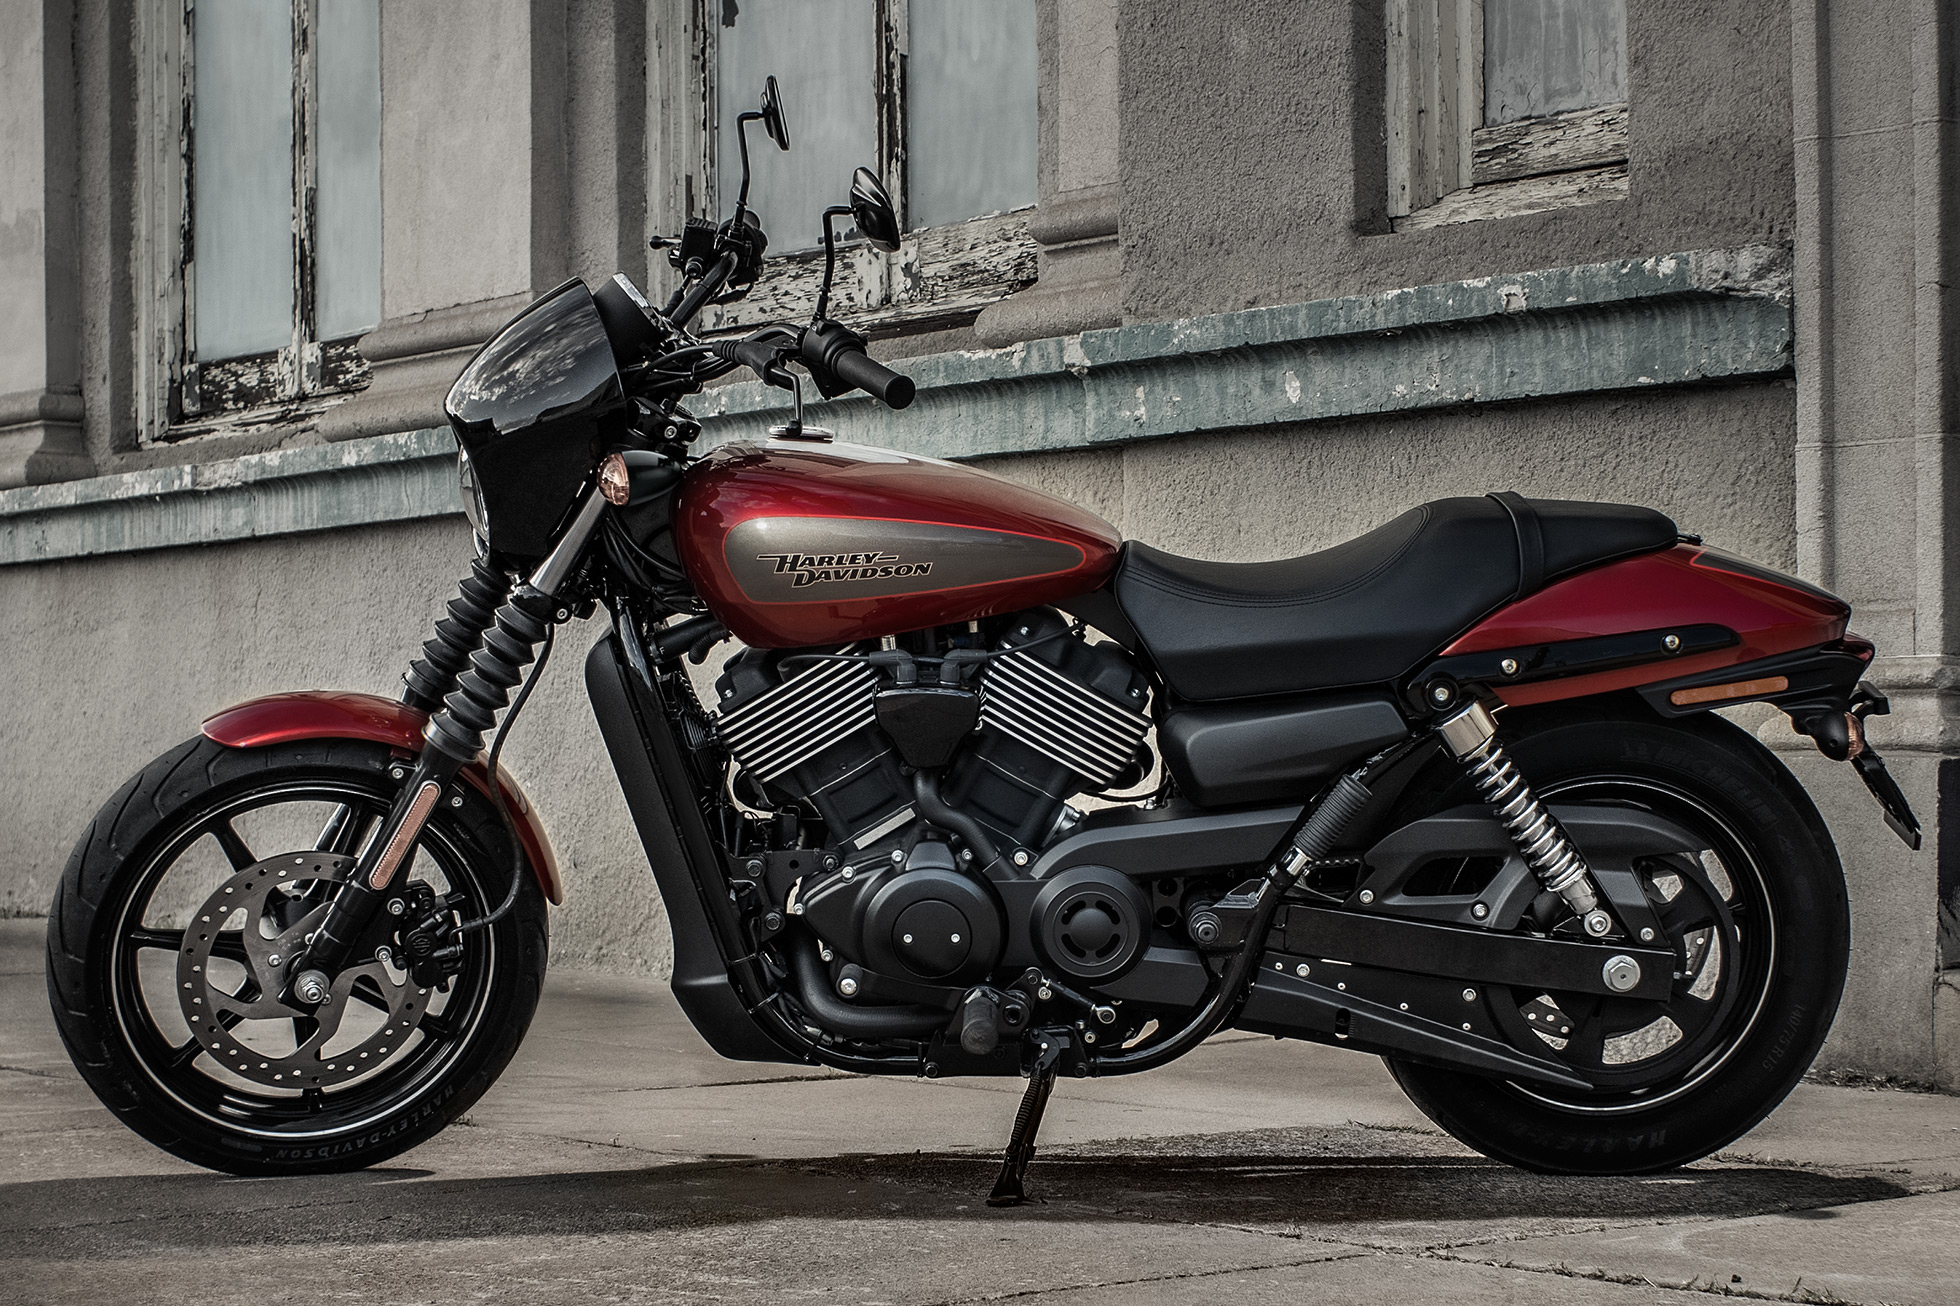 Harley-Davidson all-set to launch the 2017 Street 750 in India